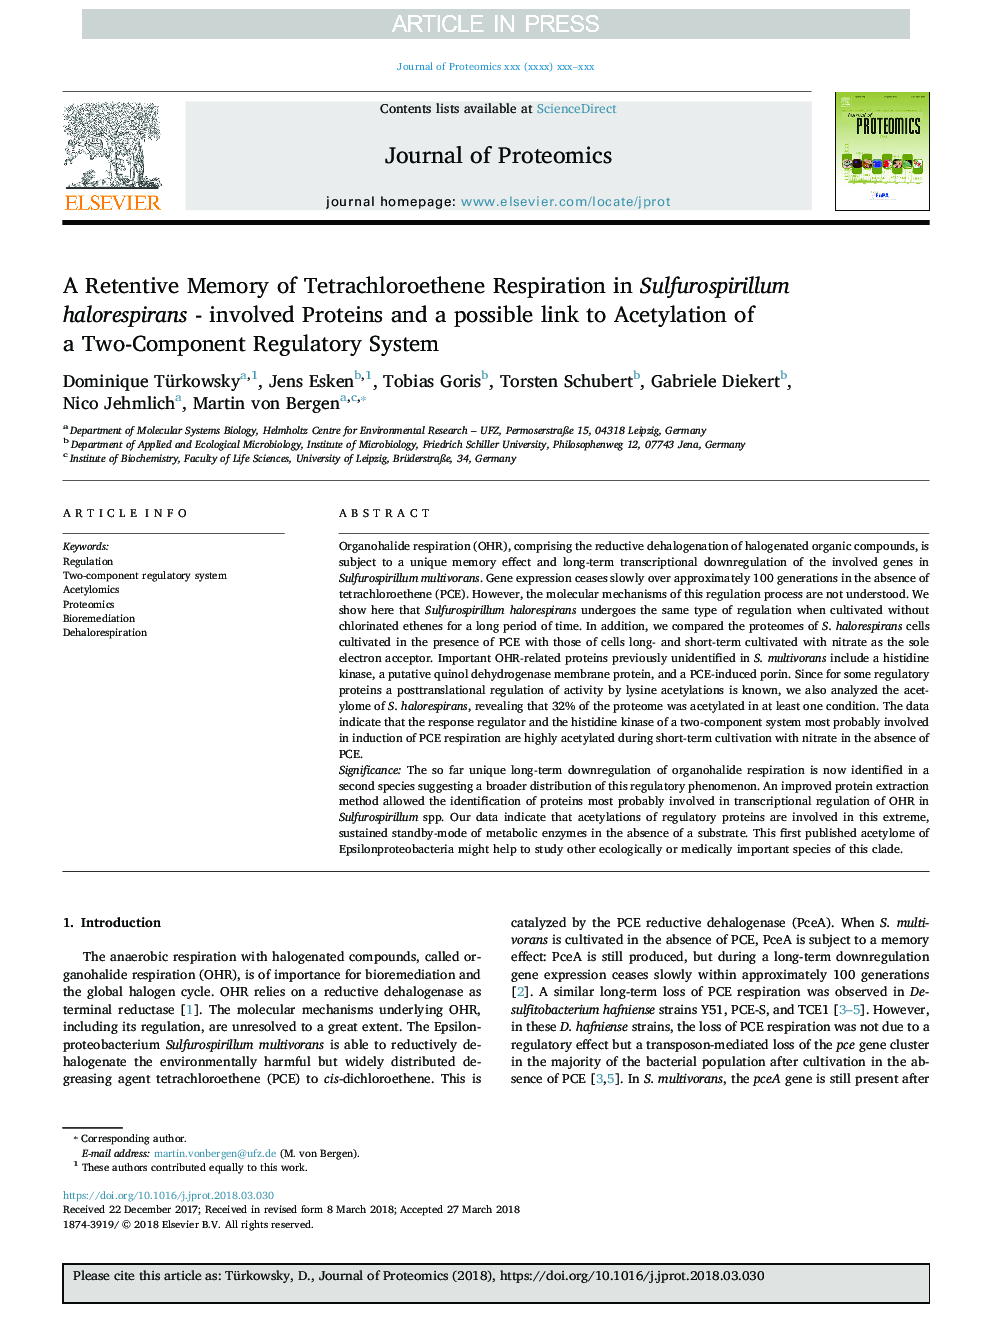 A Retentive Memory of Tetrachloroethene Respiration in Sulfurospirillum halorespirans - involved Proteins and a possible link to Acetylation of a Two-Component Regulatory System